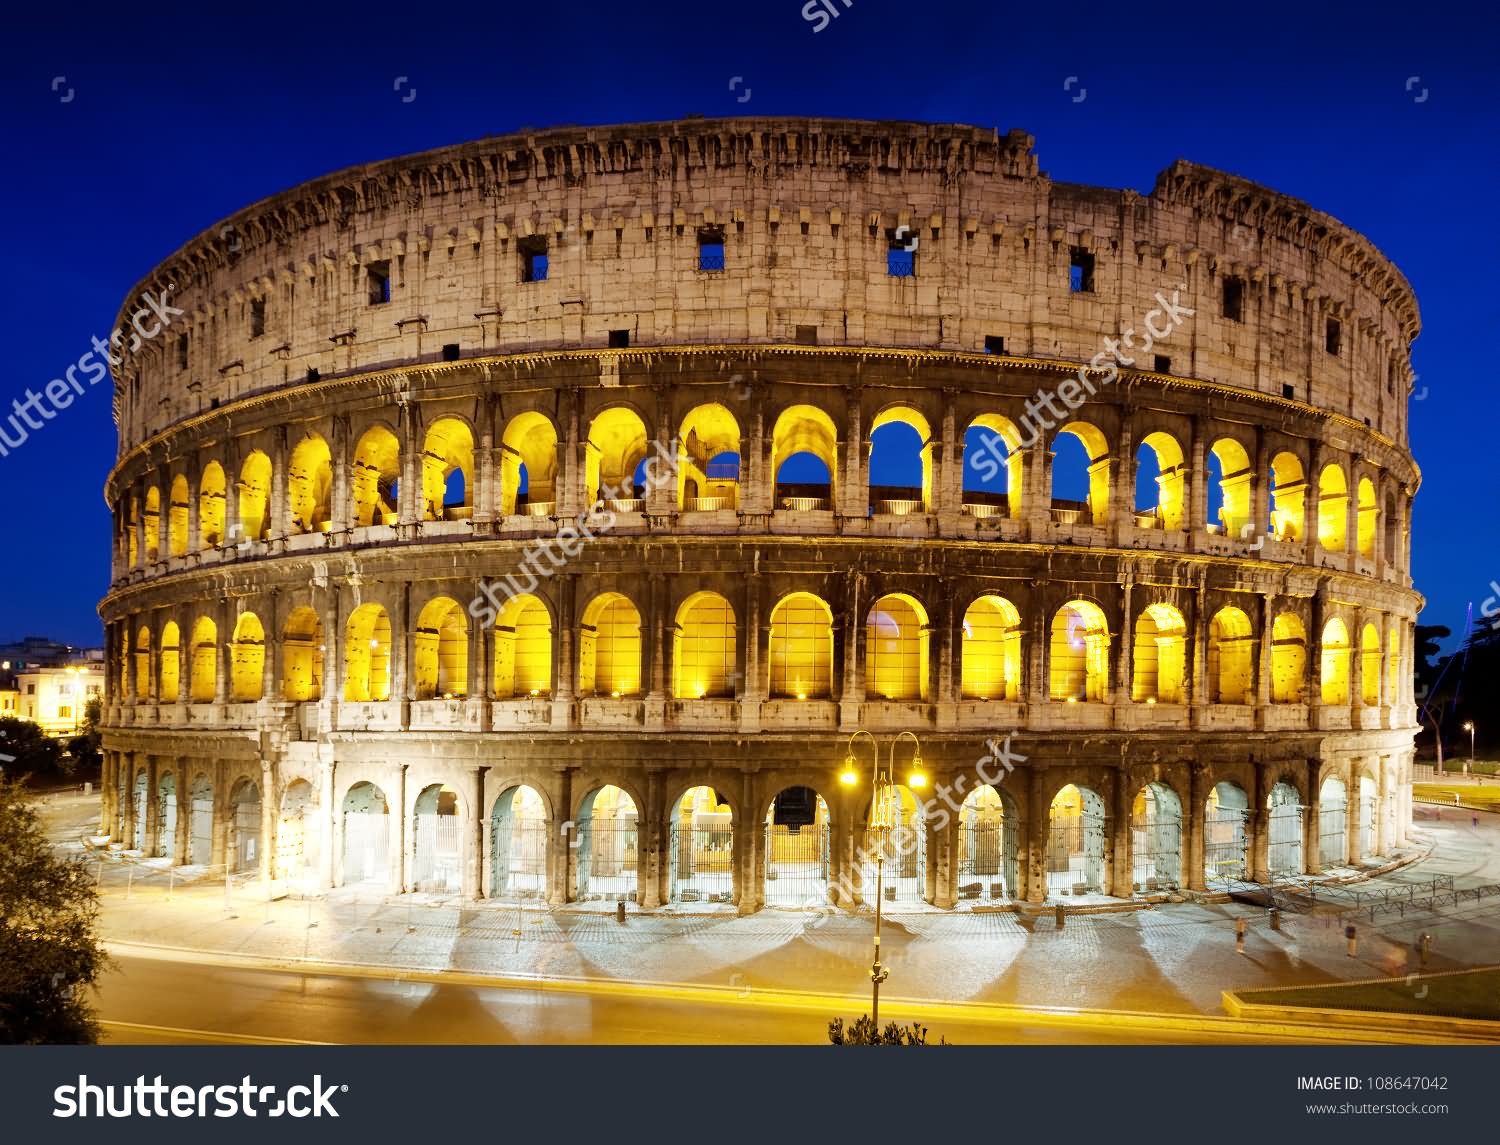 Front View Of The Colosseum Night Image